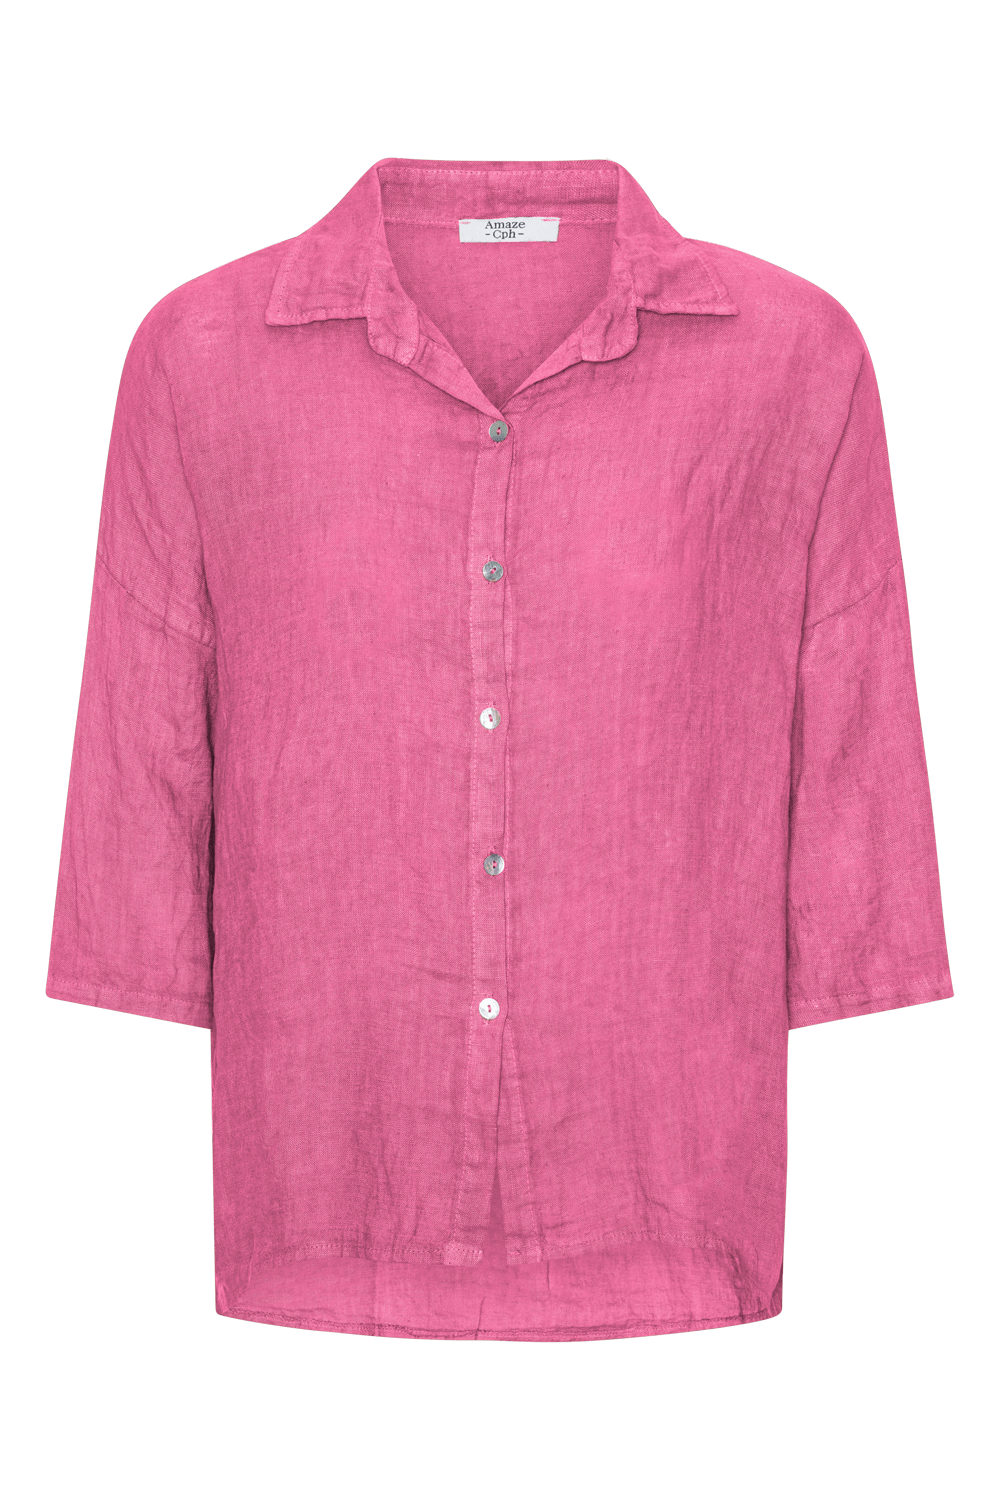 Linen New Classic - Pink - Amaze Cph - Pink - One Size